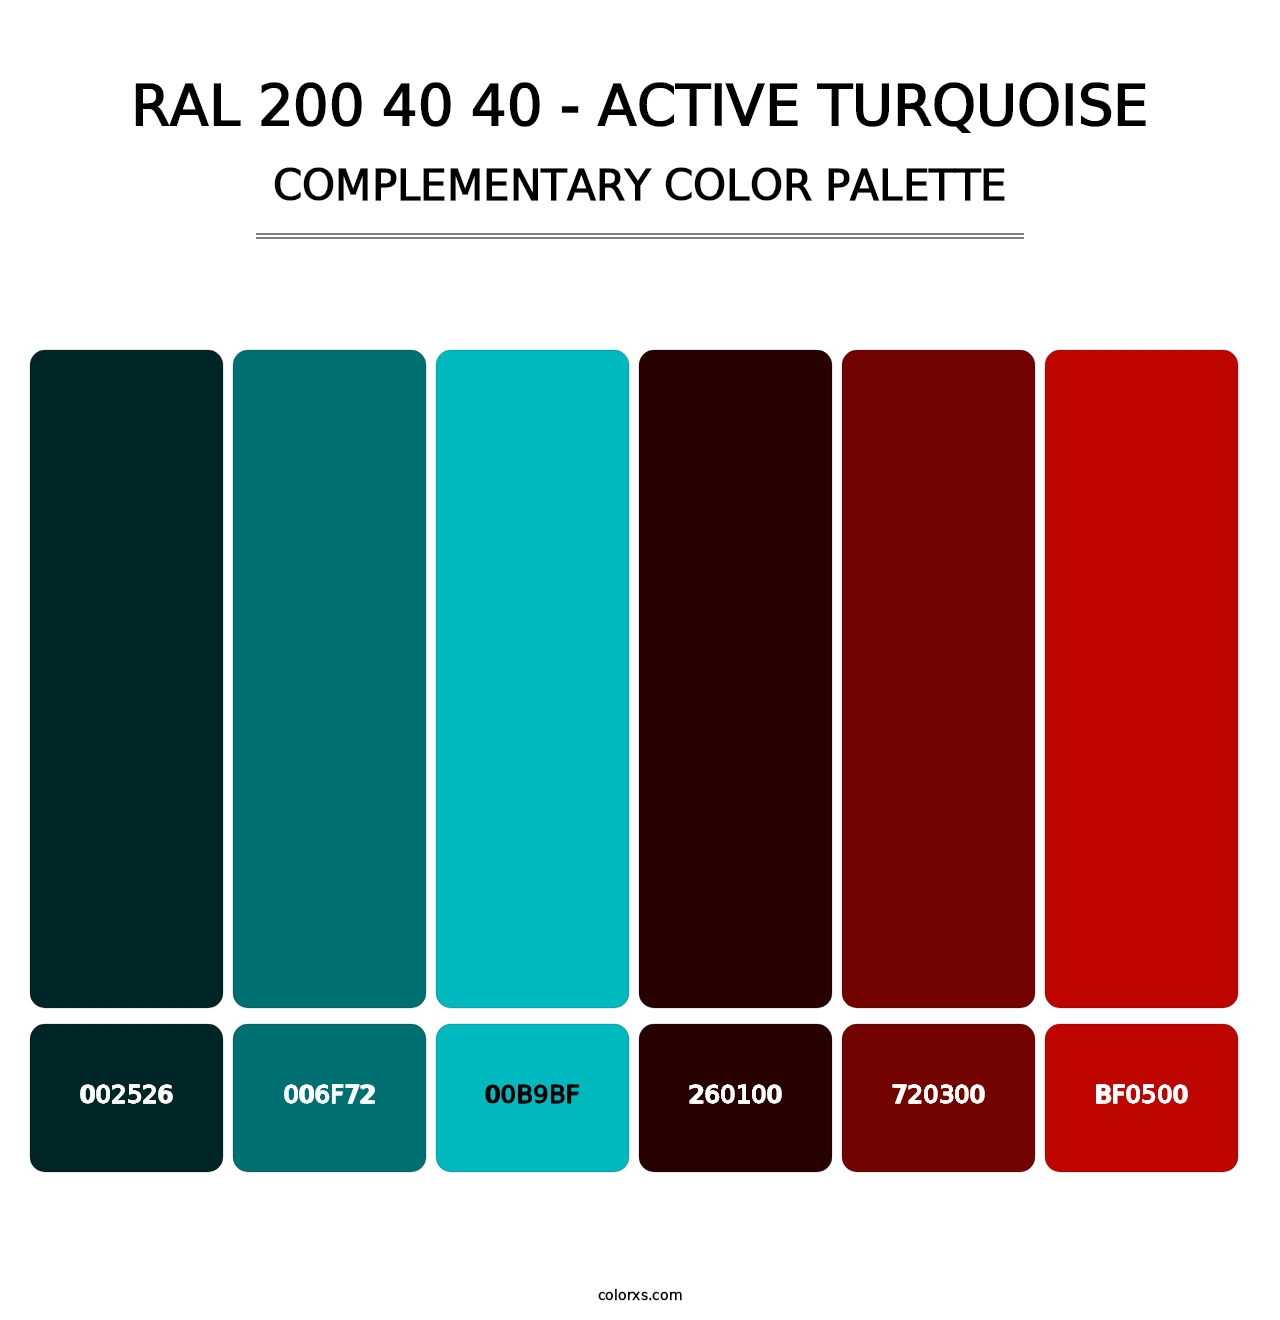 RAL 200 40 40 - Active Turquoise - Complementary Color Palette